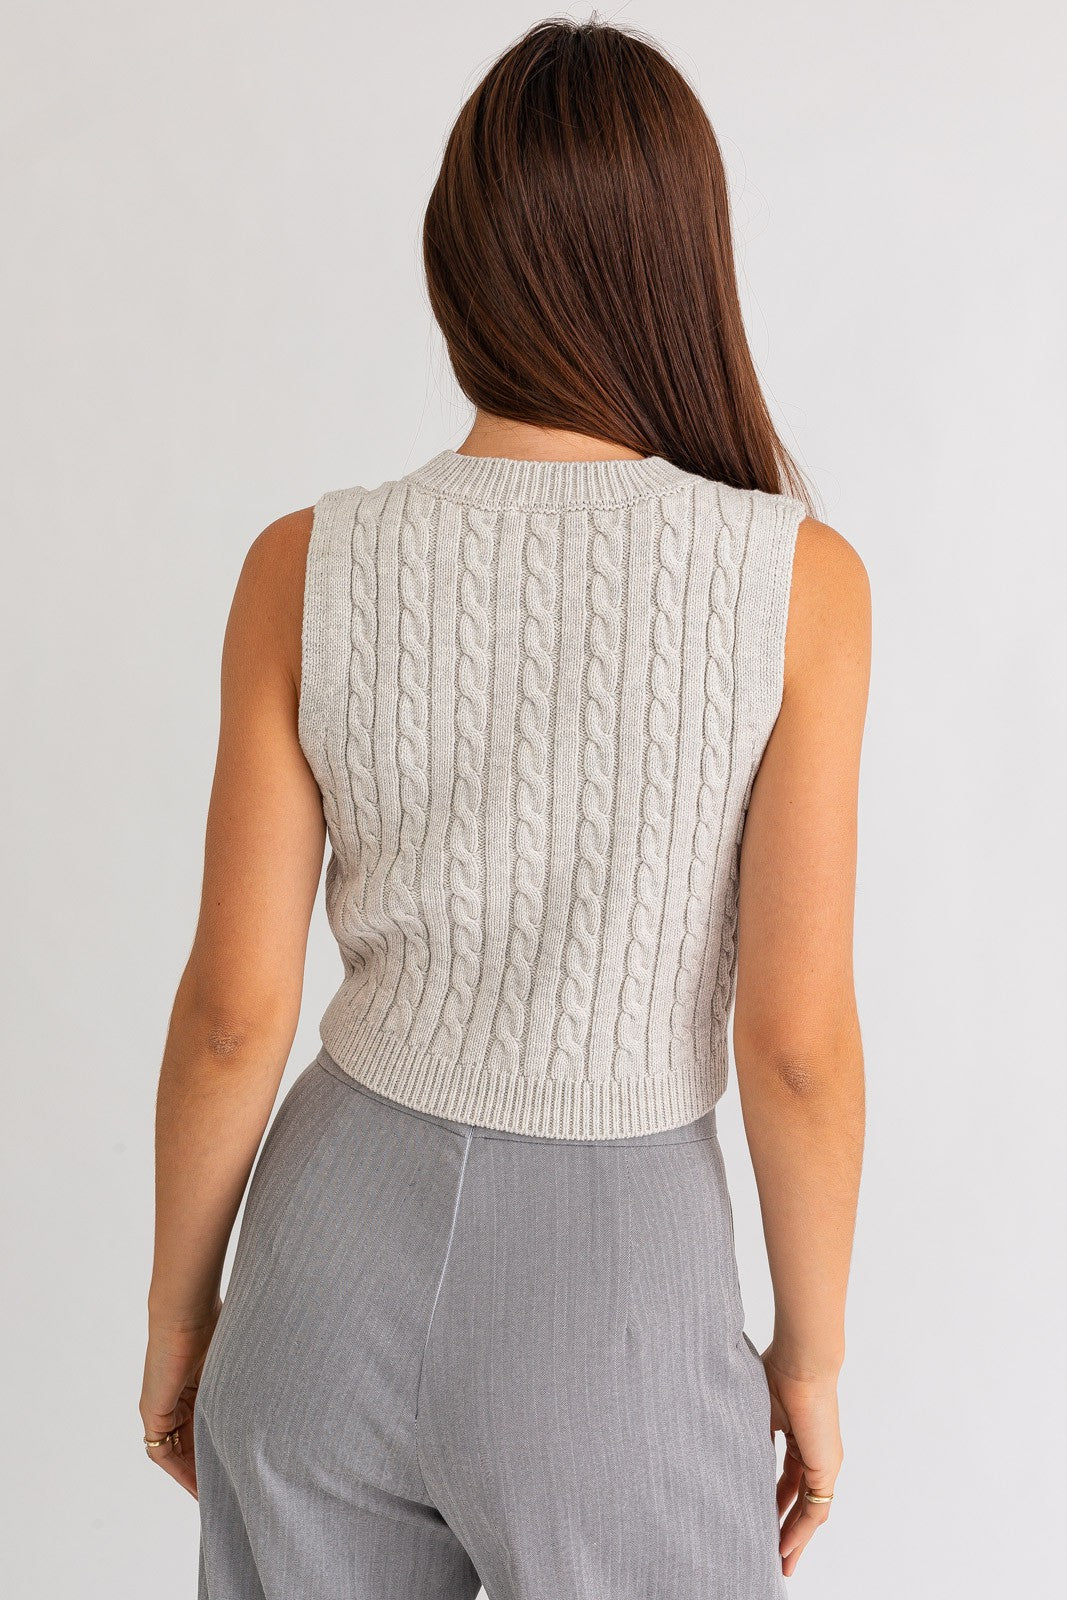 Brixx Cable Knit Tank Top